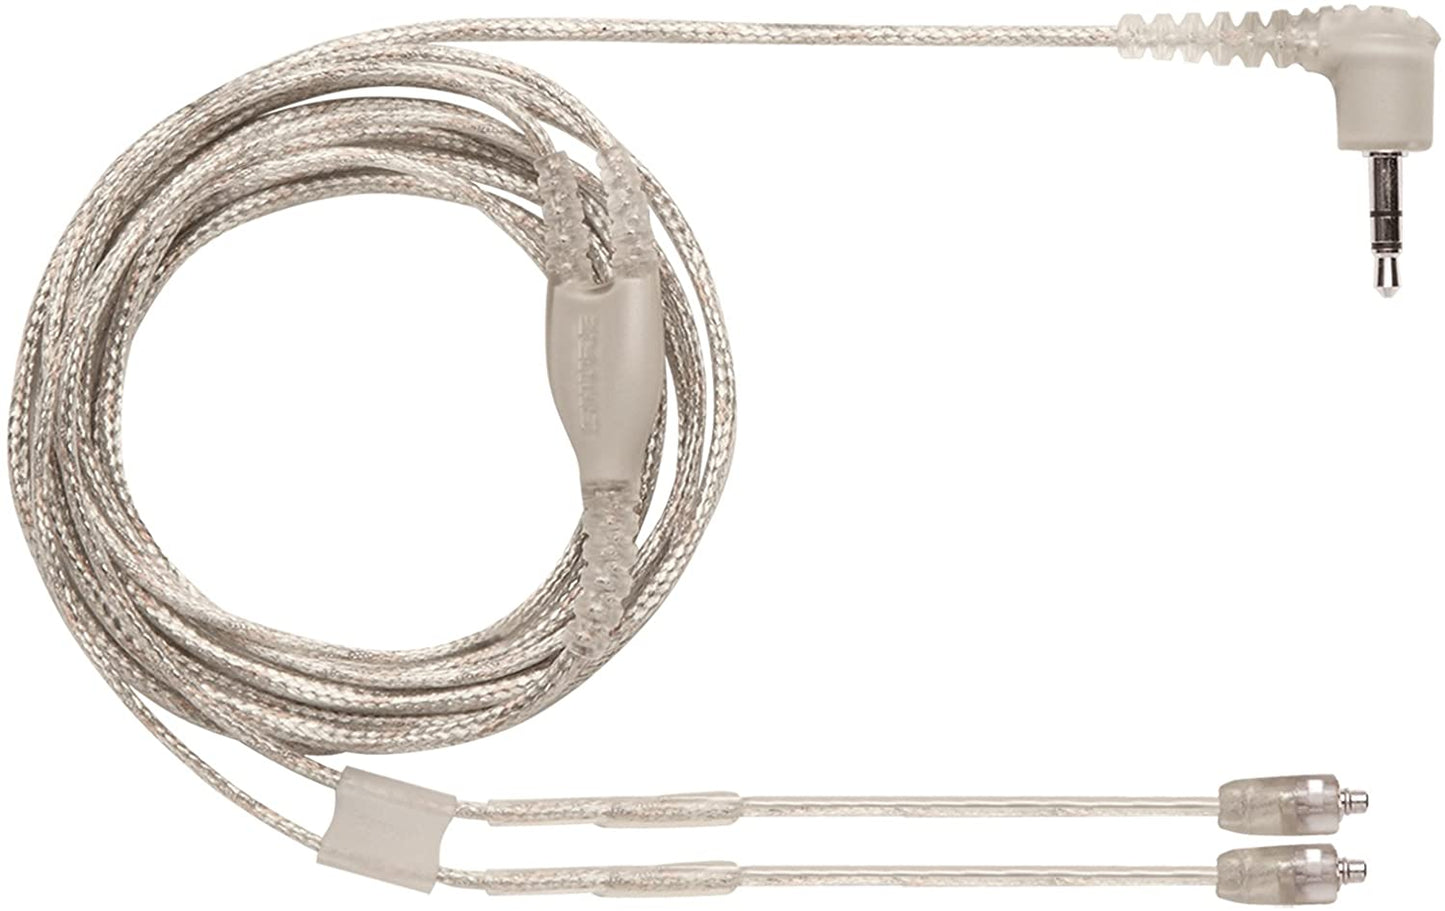 Shure EAC64 Earphones Replacement Cable